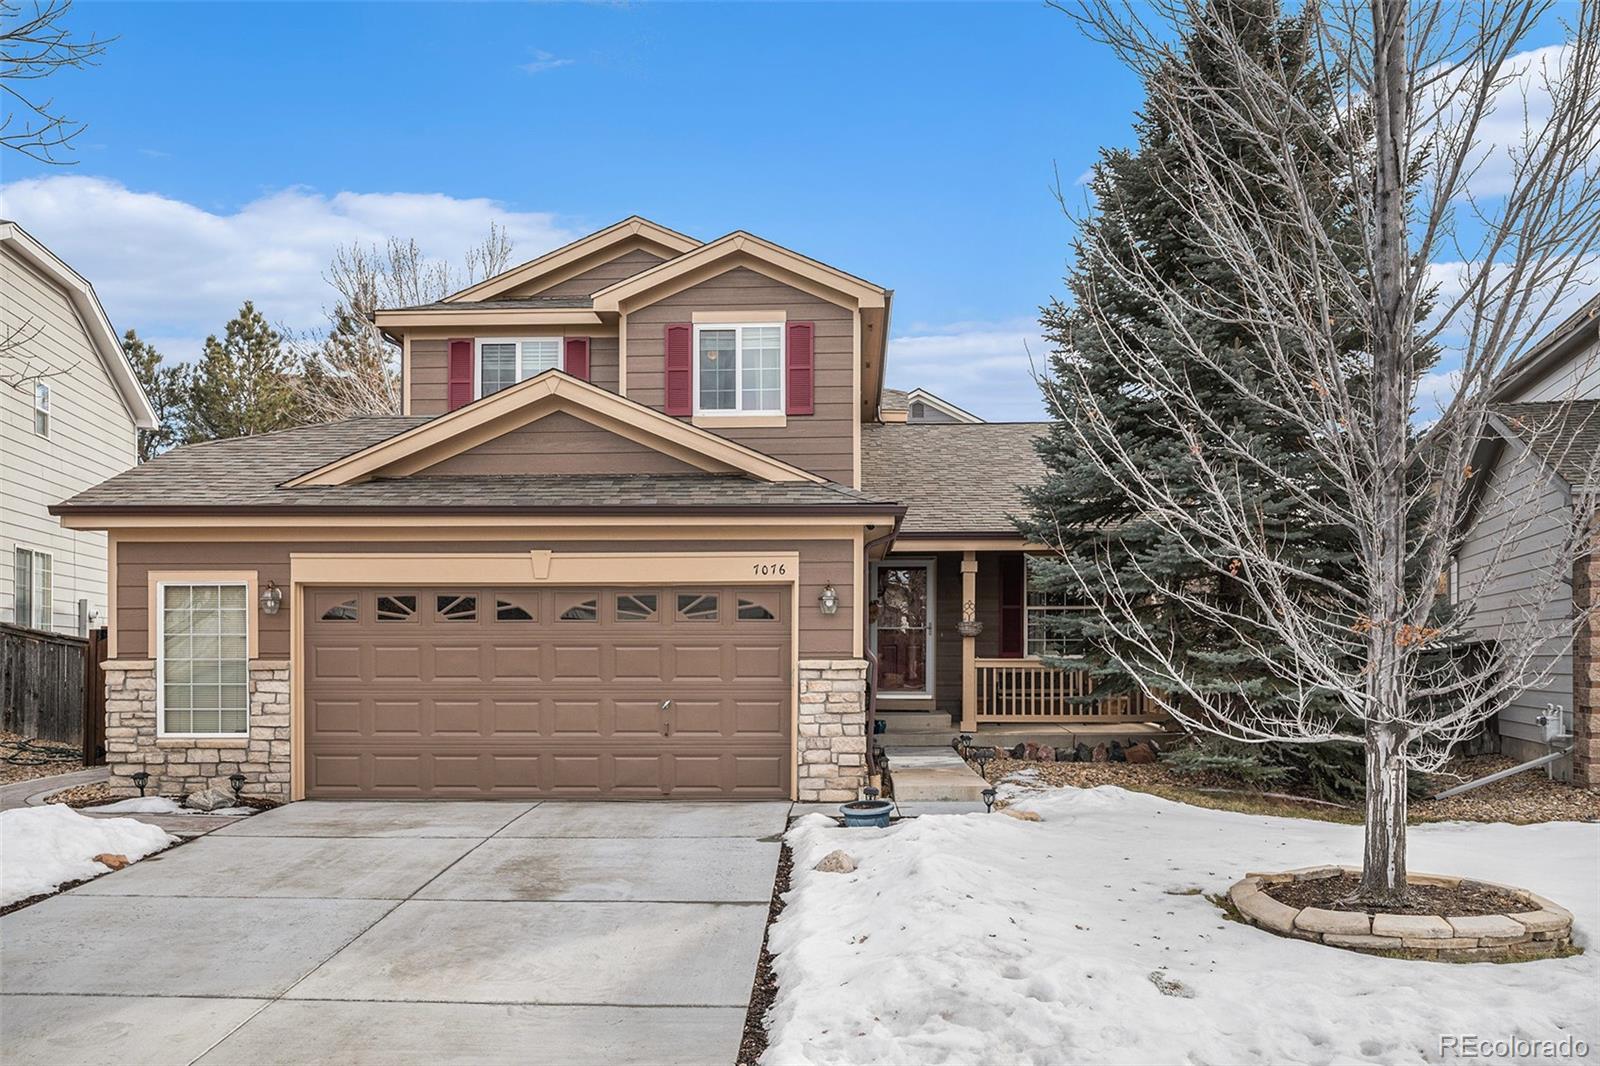 7076  leopard gate , littleton sold home. Closed on 2024-03-01 for $689,900.